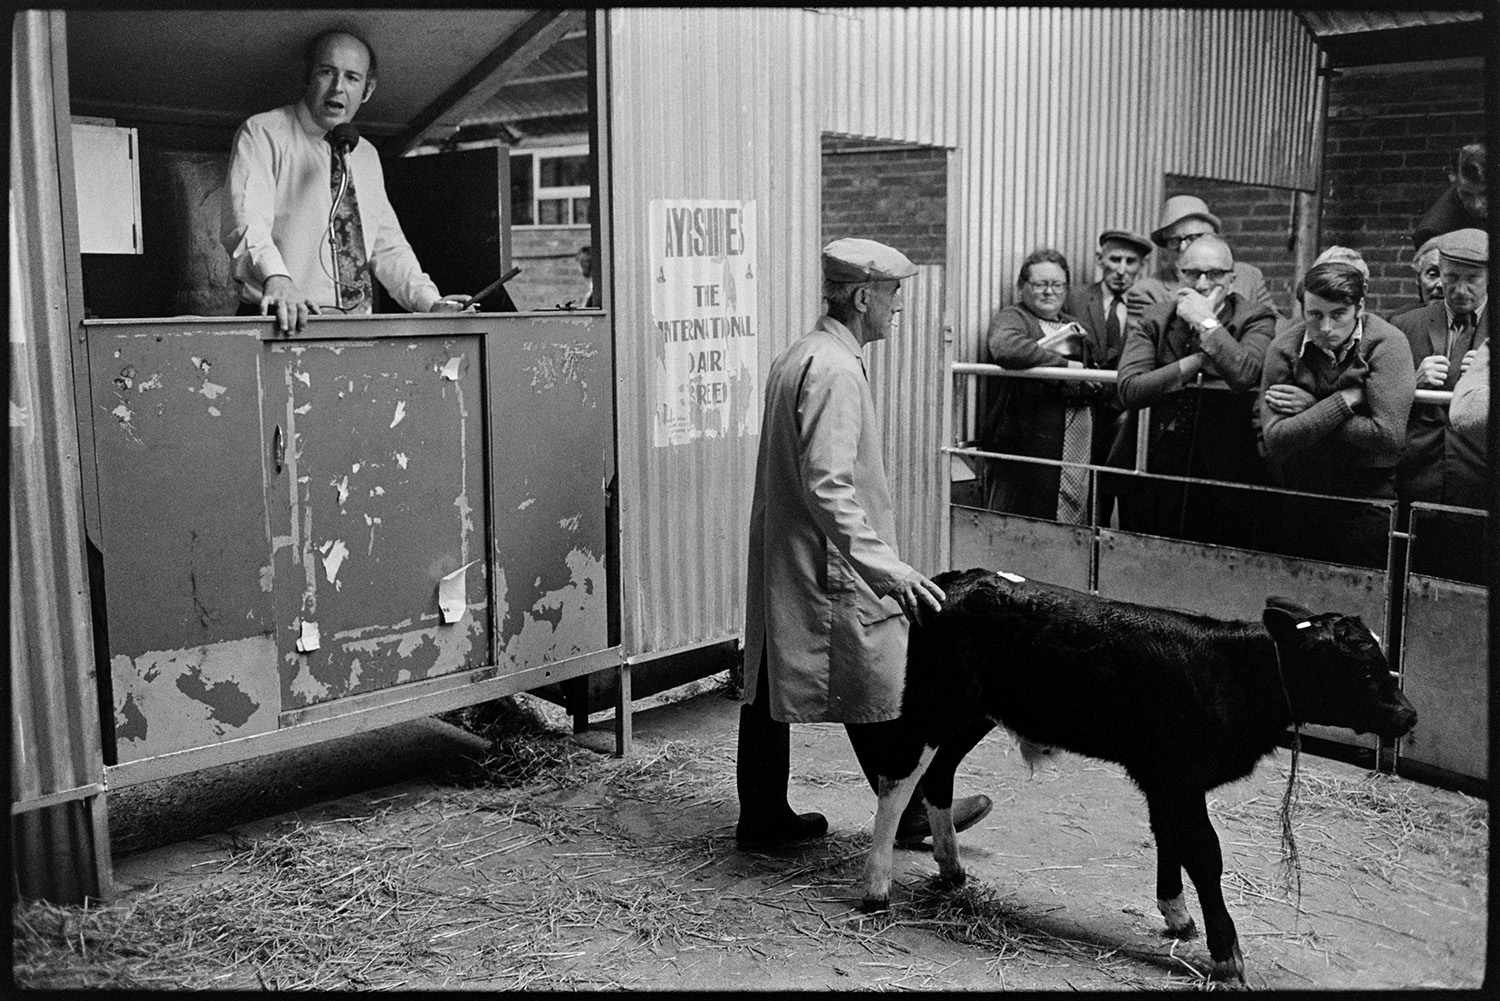 Calves being auctioned at market, Auctioneer. 
[A calf being auctioned at Hatherleigh Market. A man is showing the cow in a ring to prospective buyers. The auctioneer is speaking into a microphone from a kiosk by the ring. Olive Bennett can be seen in the crowd watching the calf.]